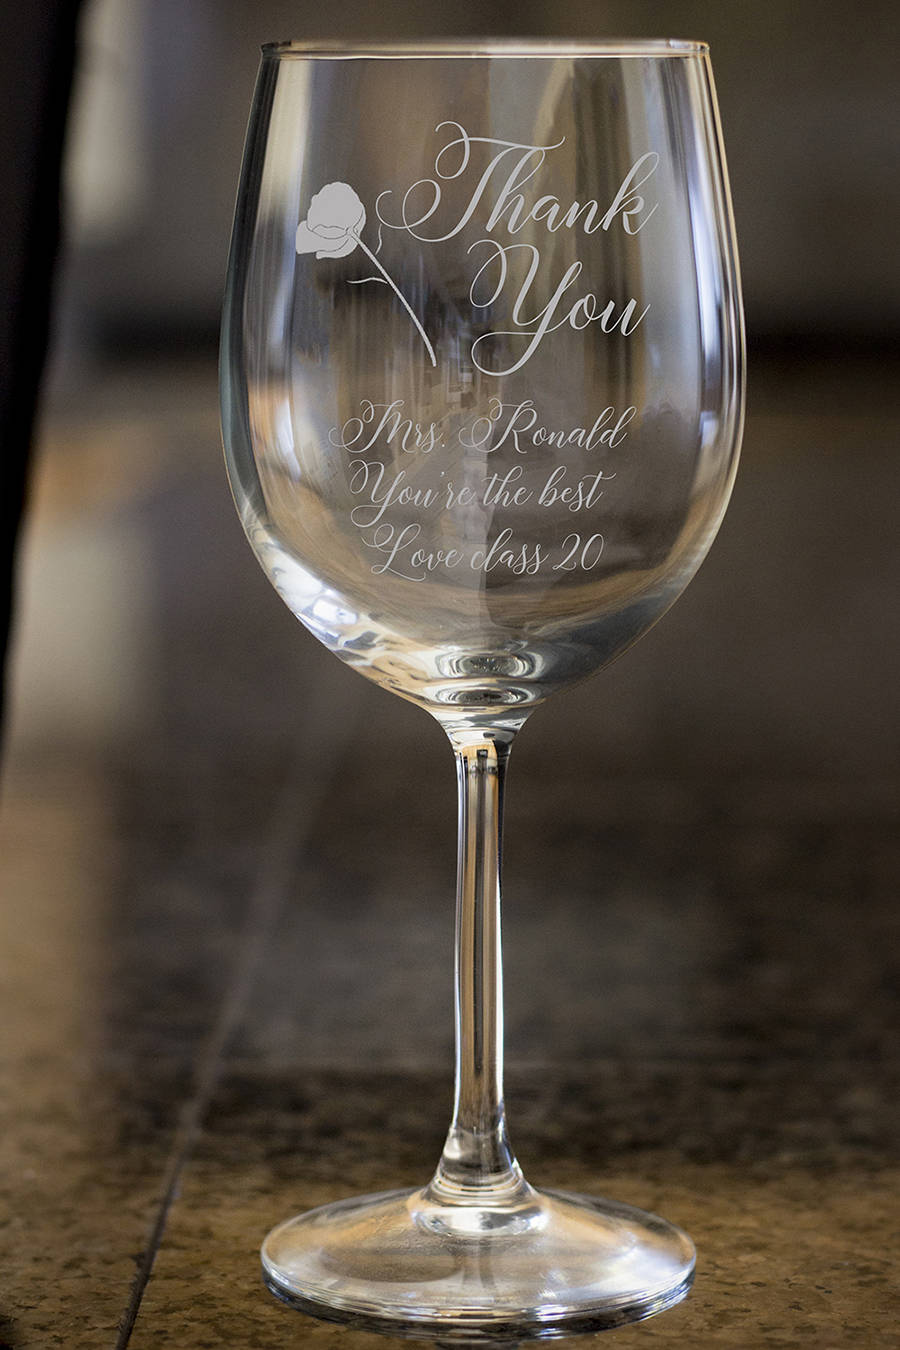 Thank You wine glass,Personalize wine glass,Engraved wine glass, etched Wine glass,wedding gift,Bachelor party,Wedding Favor, anniversary